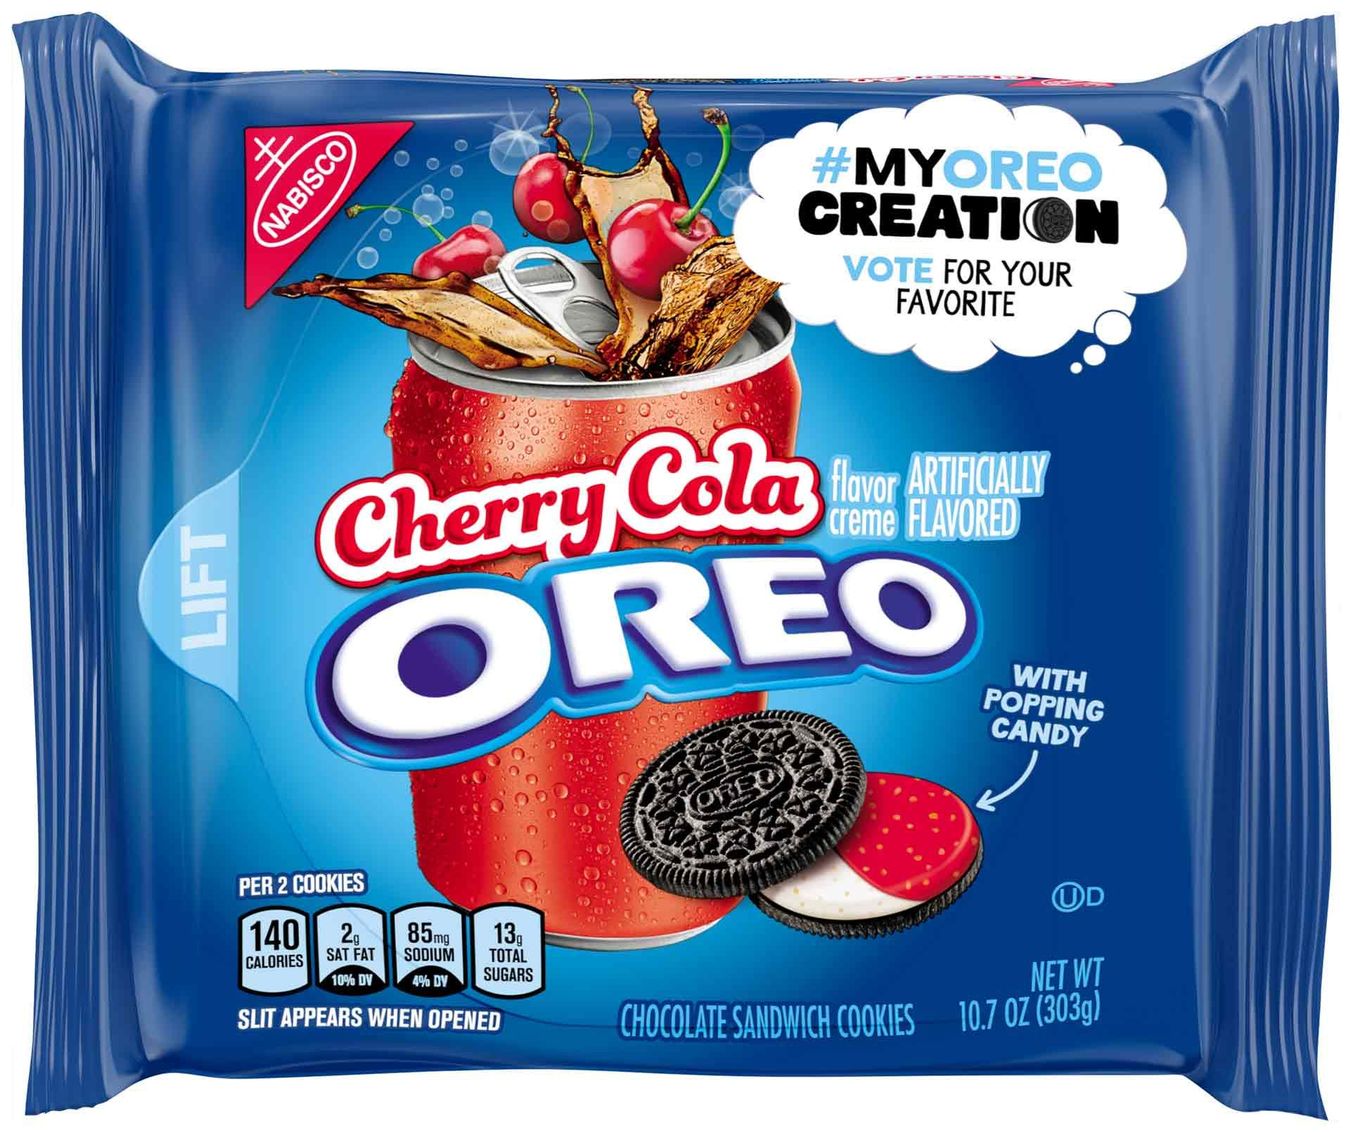 Two New Oreo Flavors Are Here, And They're Totally Summer